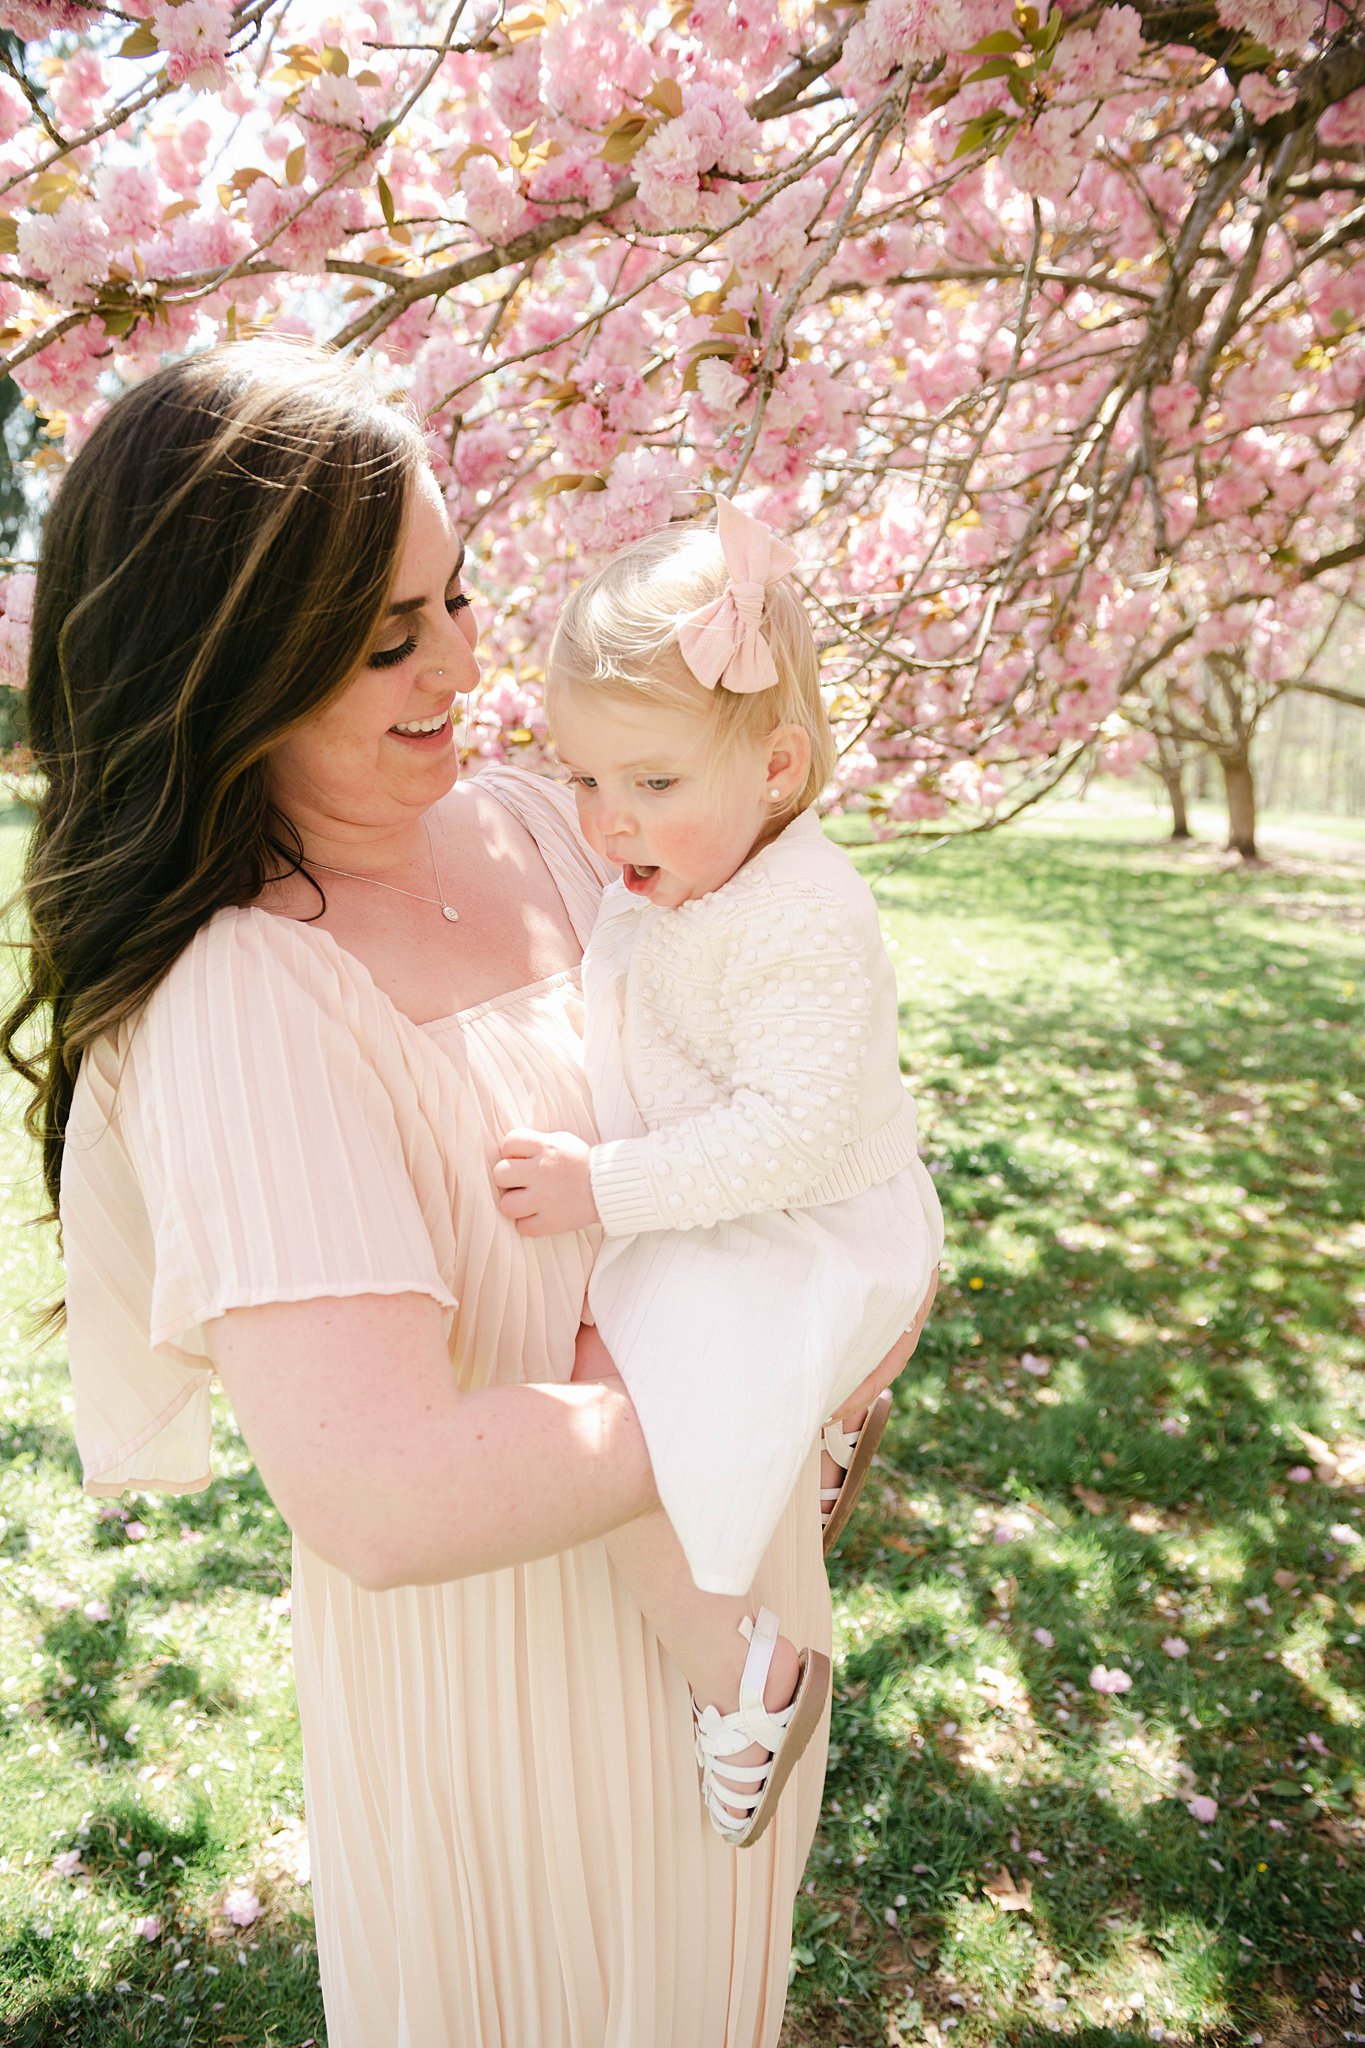 A mother holds her young daughter wearing a white dress and pink bow under pink blossoms of a tree kids 'n kribs